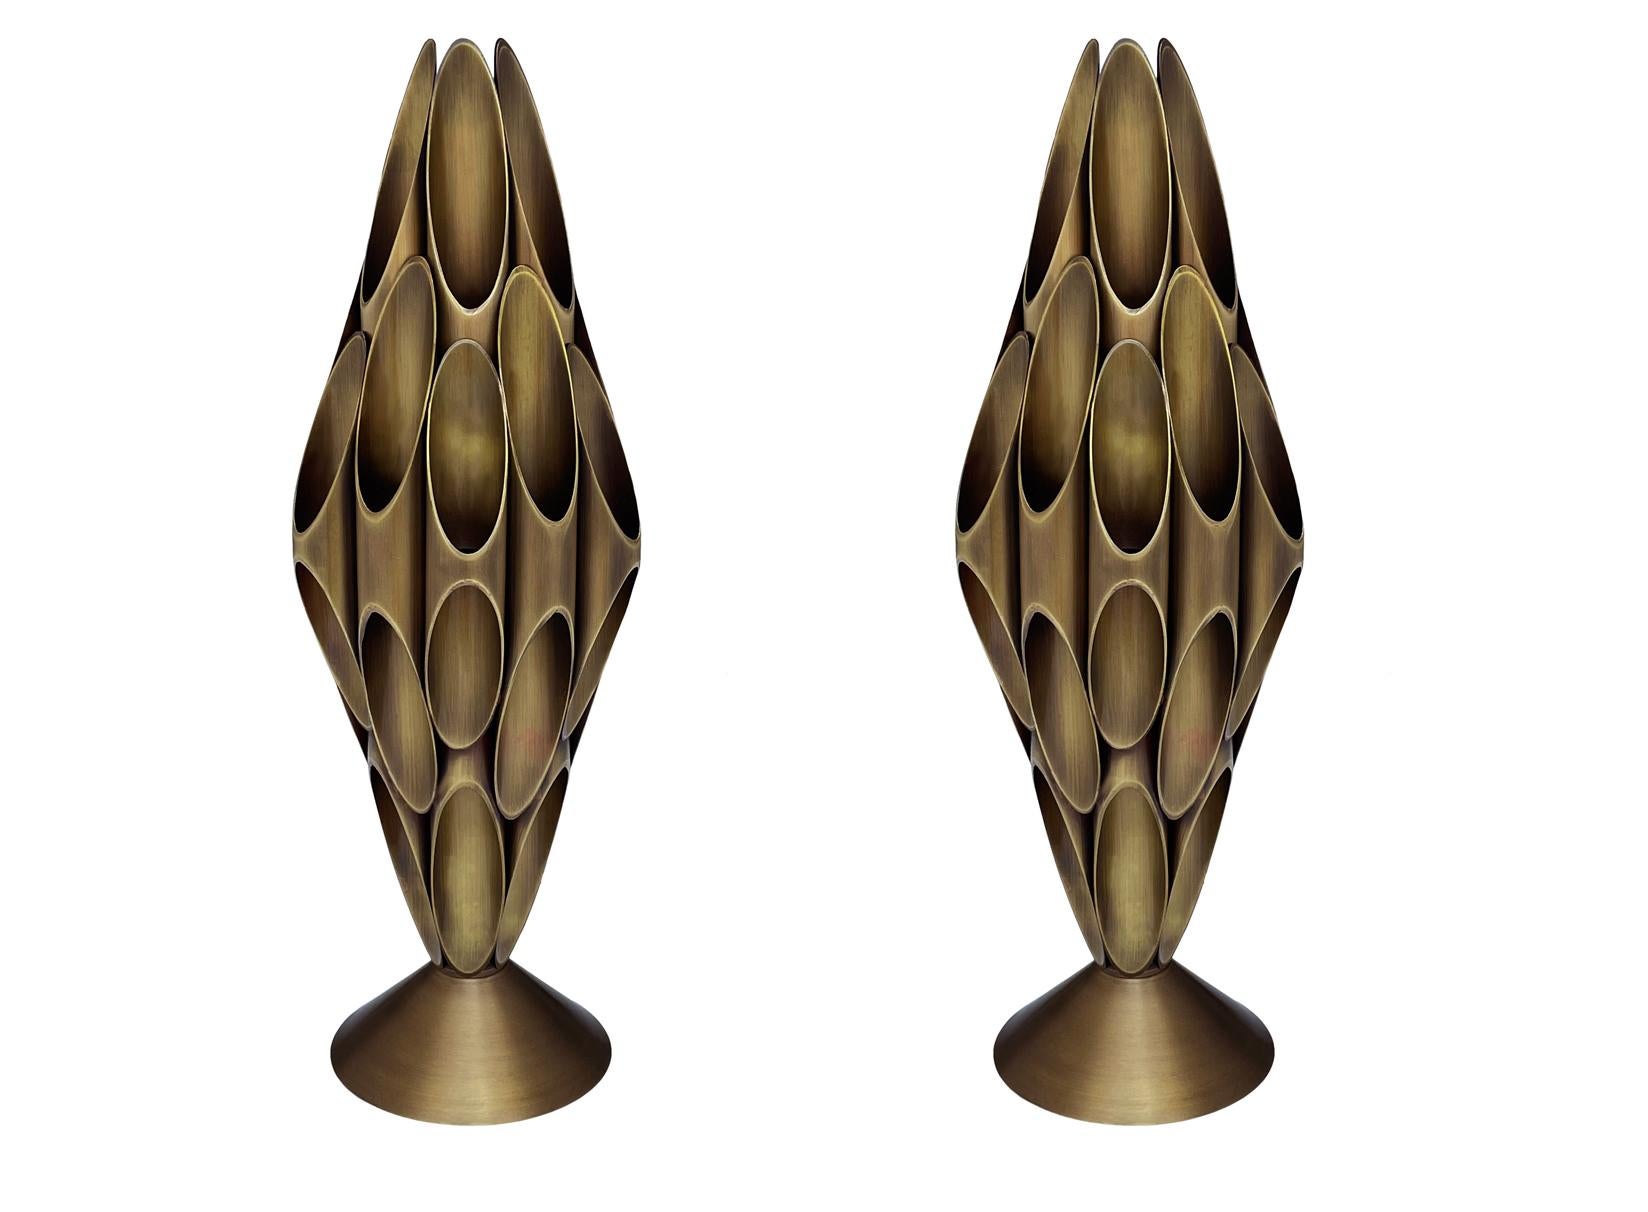 A pair of striking & chic tubular table lamps made by Designline. These feature heavy all brass construction. Nice warm accent lighting. Takes one standard bulb. Cord is very long with built in switch.